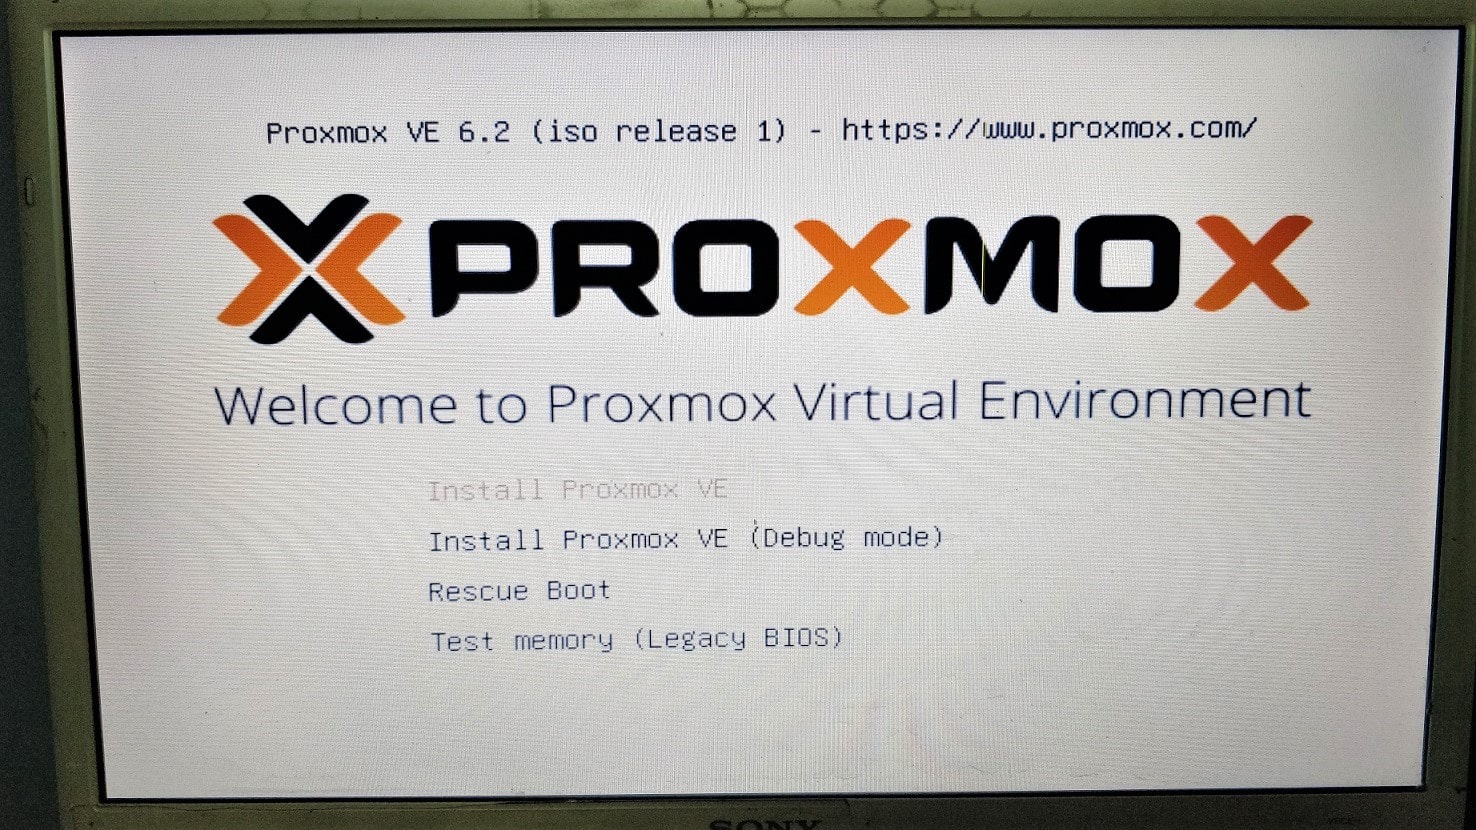 Ringlet klokke Brig How to create Proxmox bootable USB drive for installation - Linux Shout